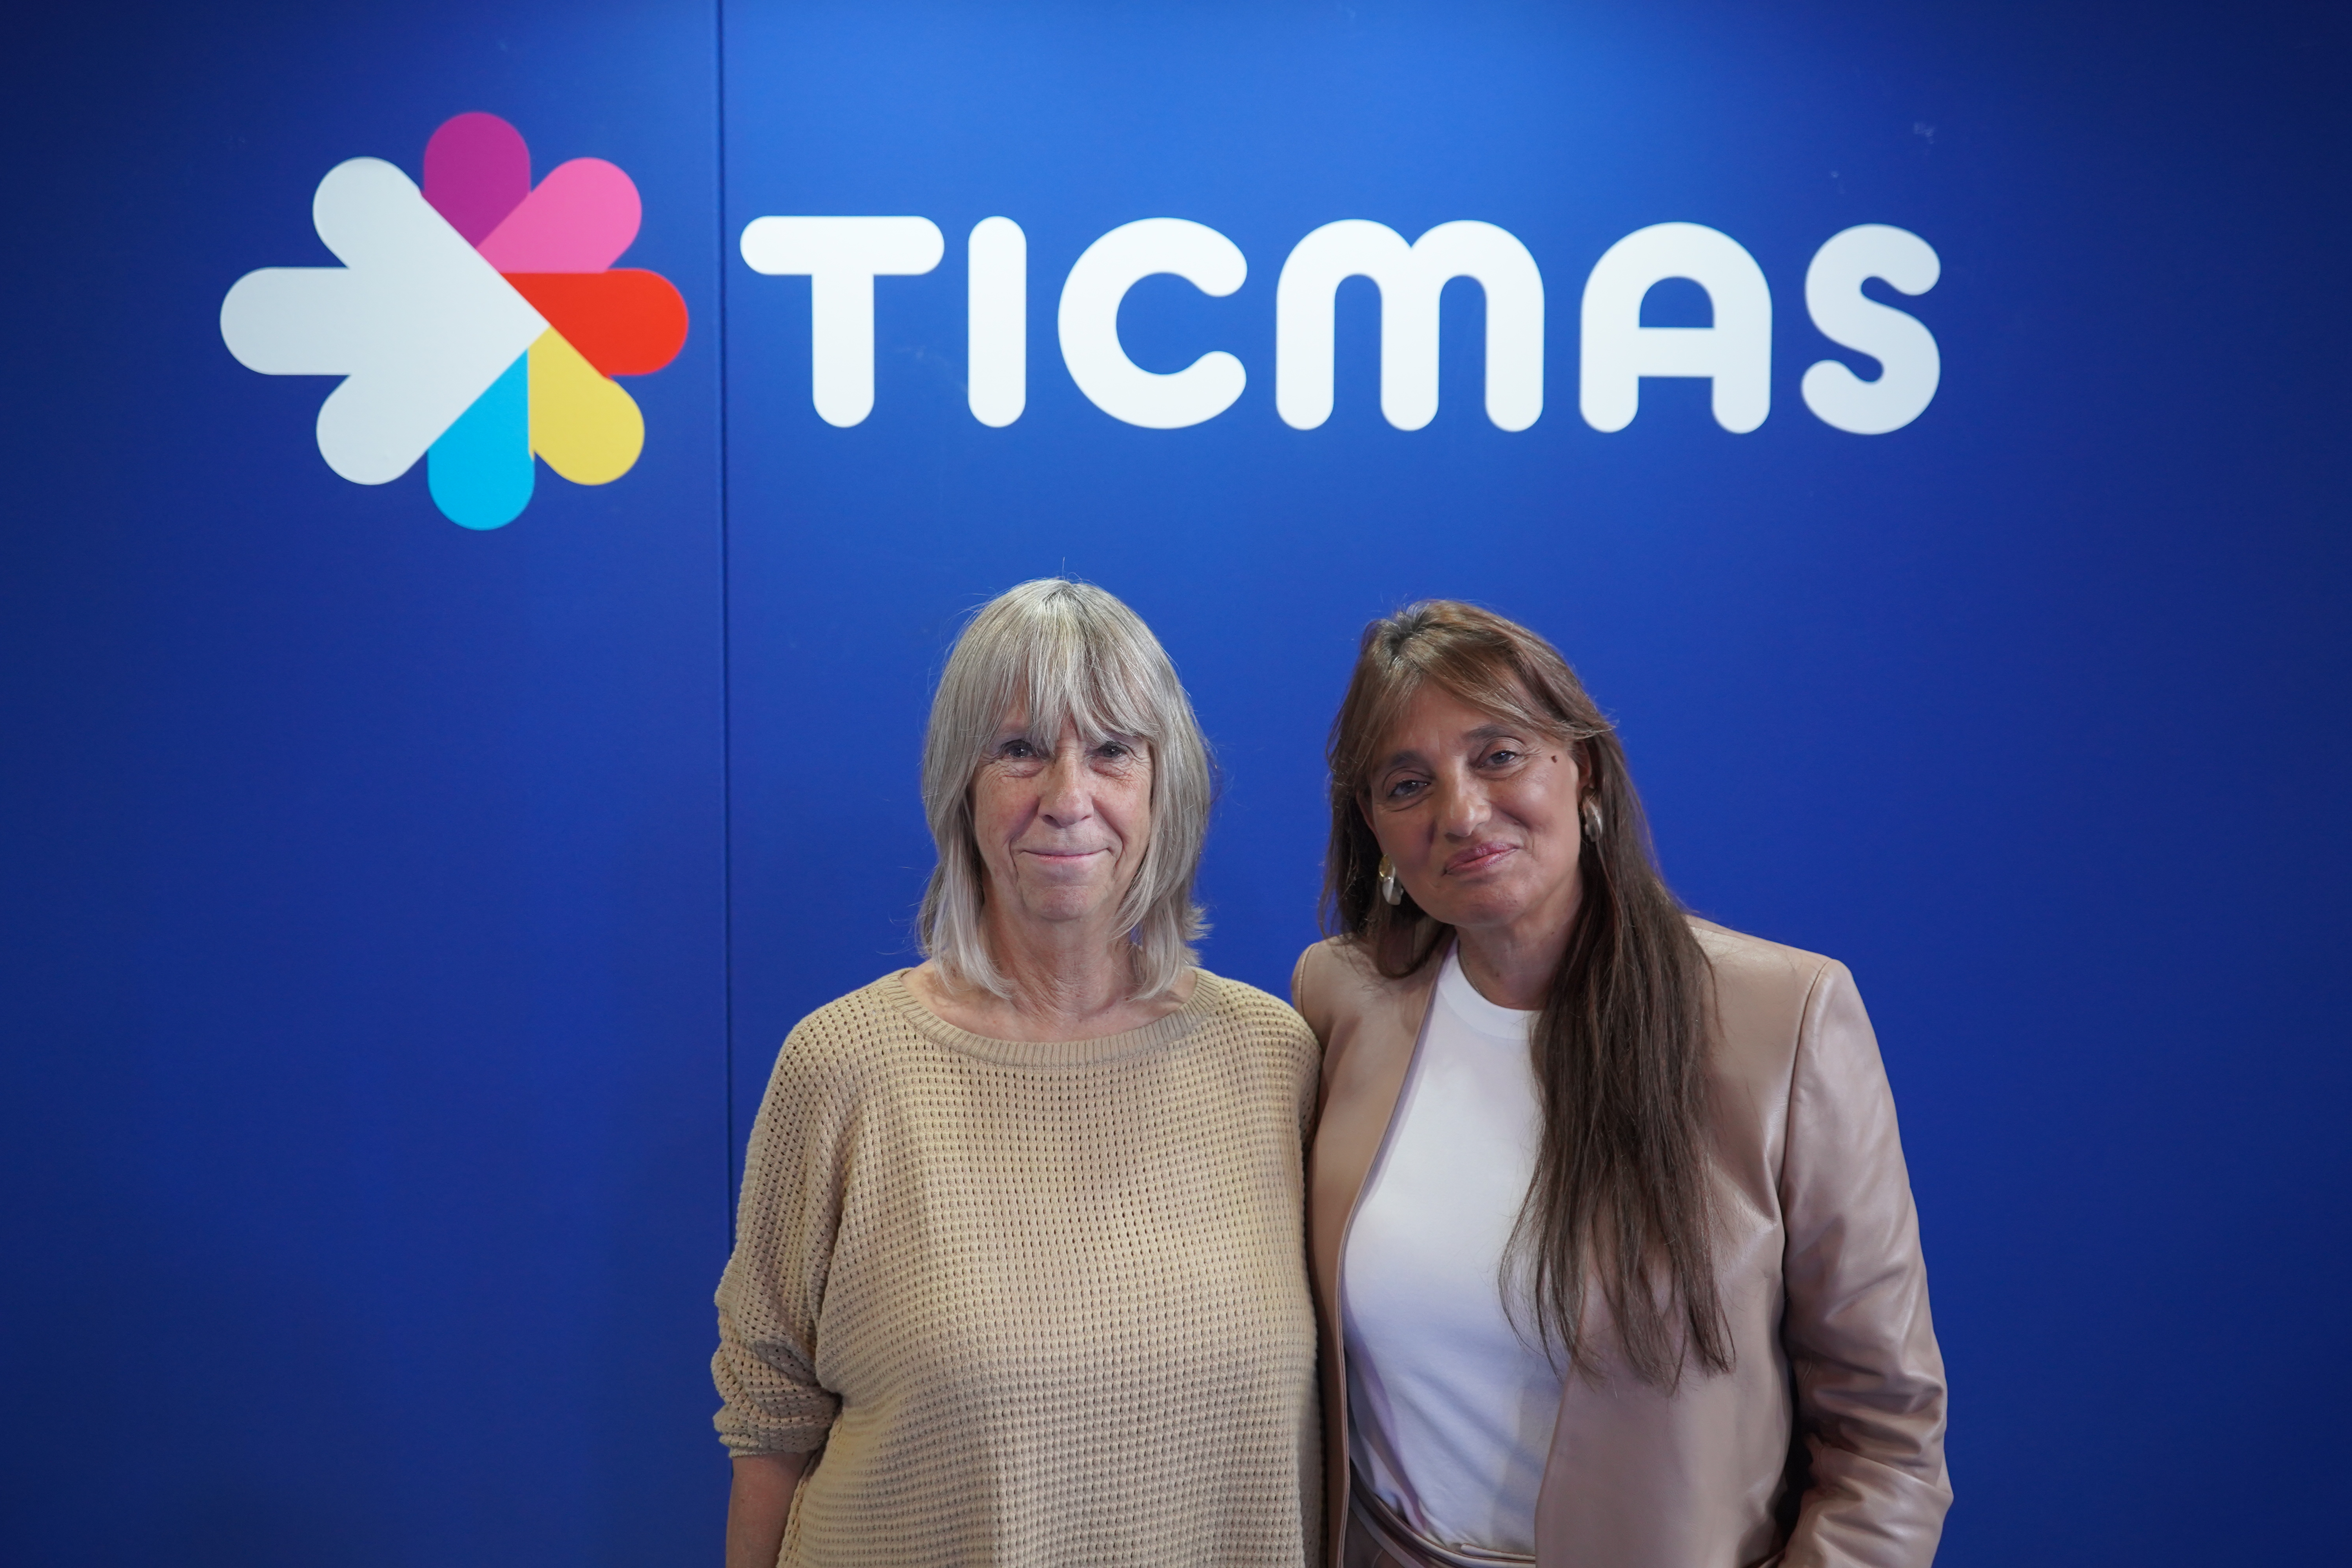 Silvia Torres Carbonell, CEO of Wise, together with Viviana Zocco, CEO of Ticmas (photo: Agustin Brashich)